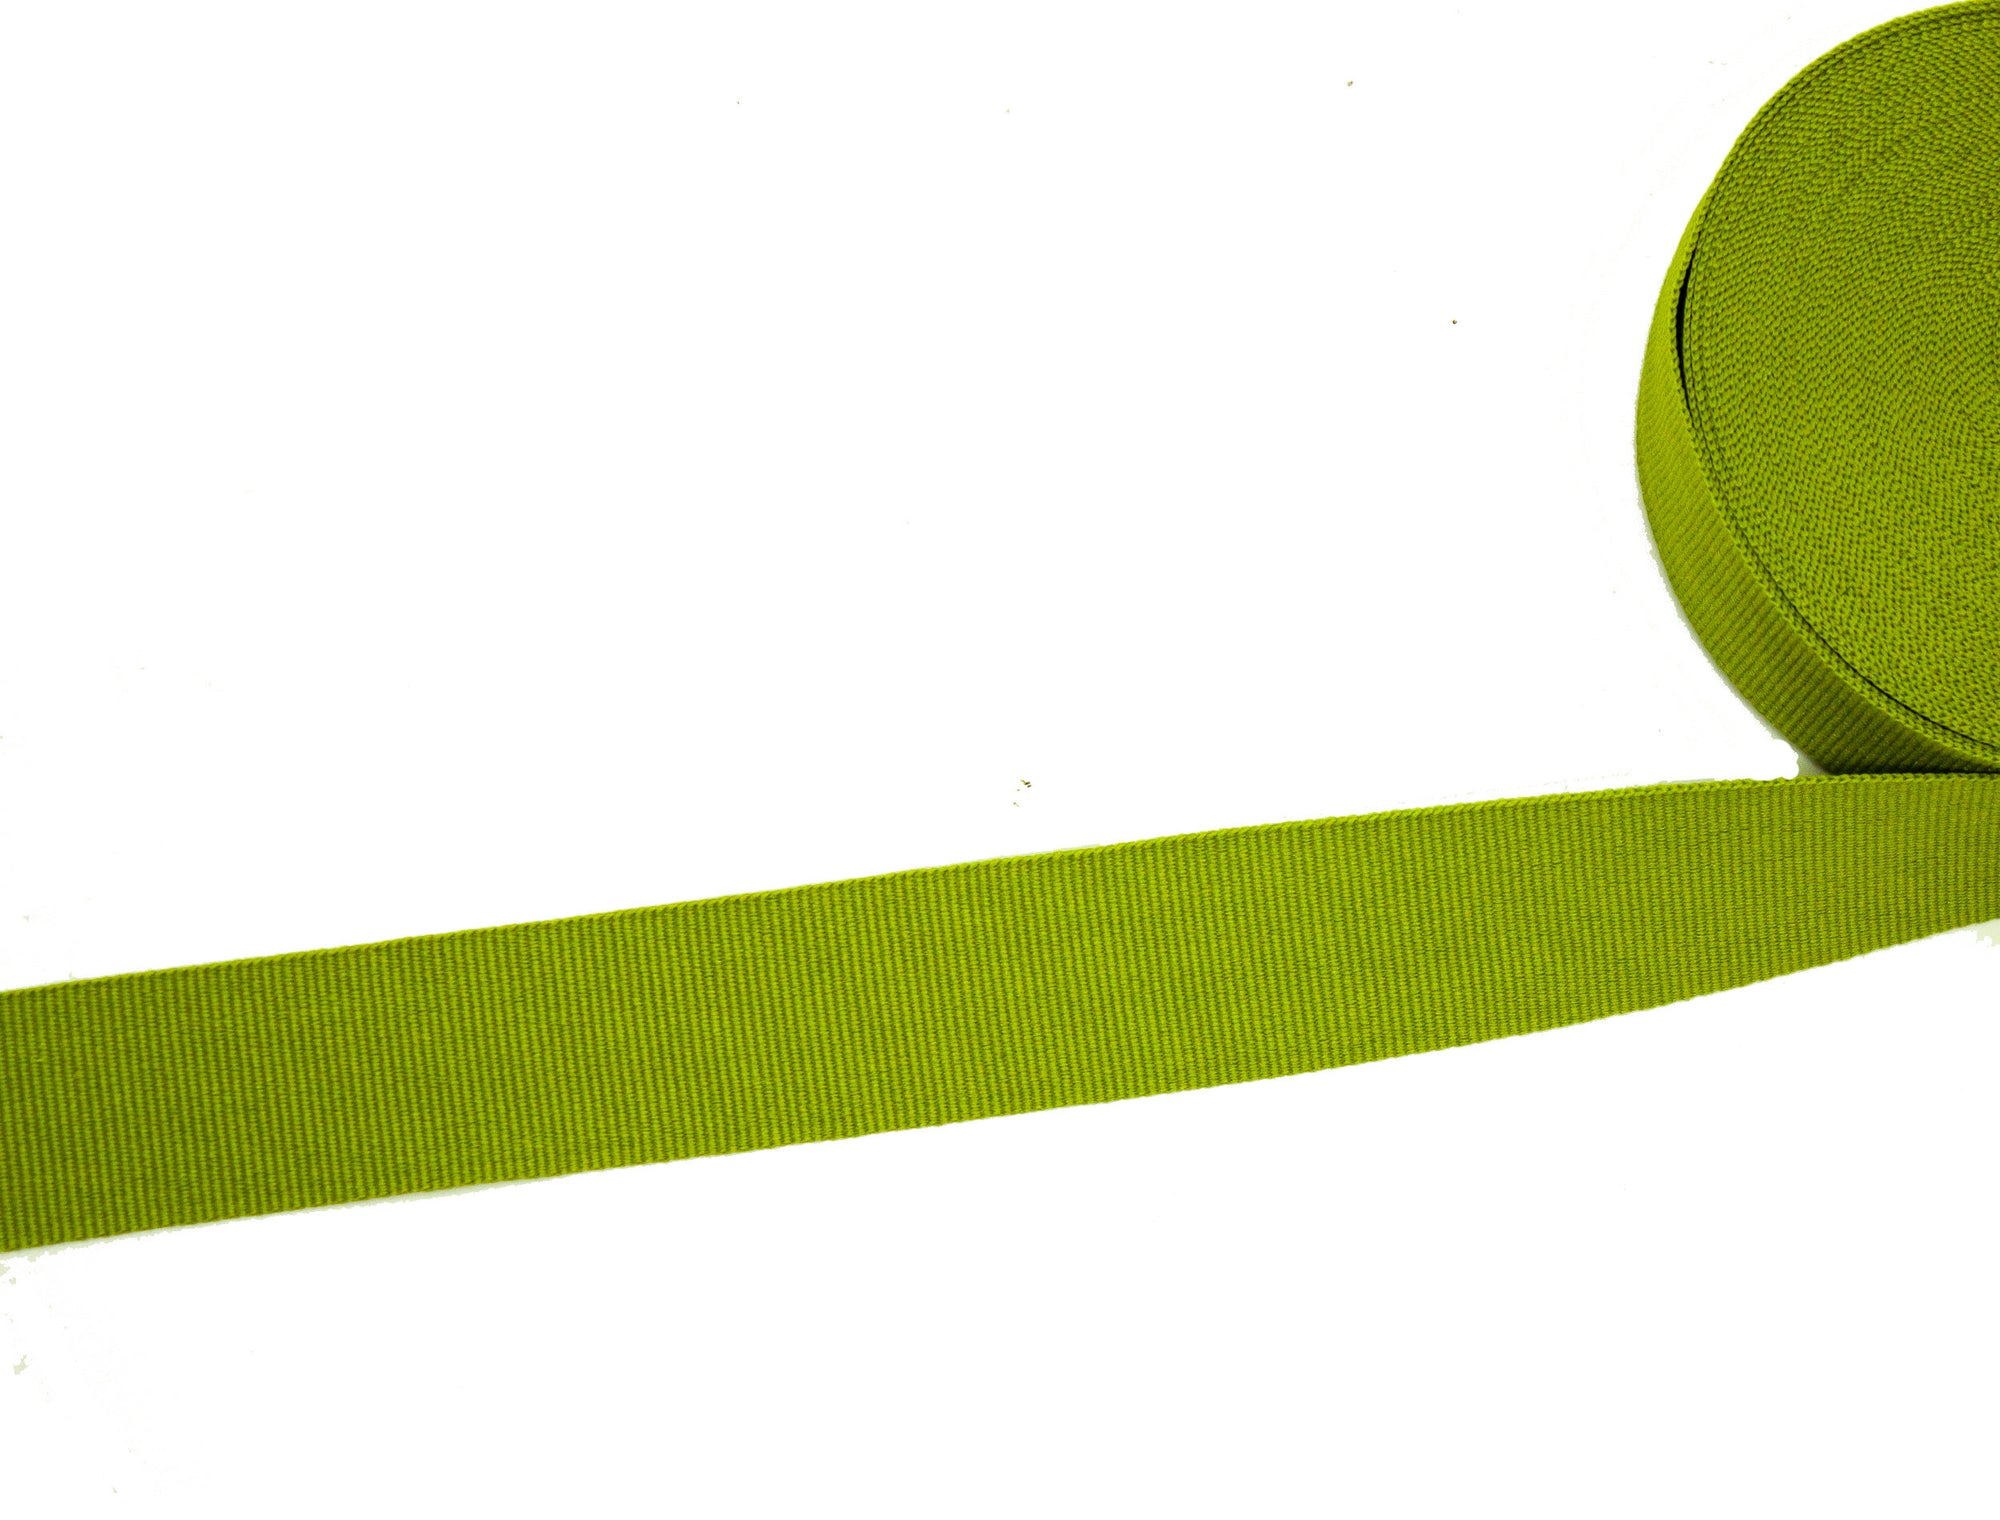 Vintage Grosgrain Ribbon Olive Green Measures 25 mm Wide - Sold by the Yard